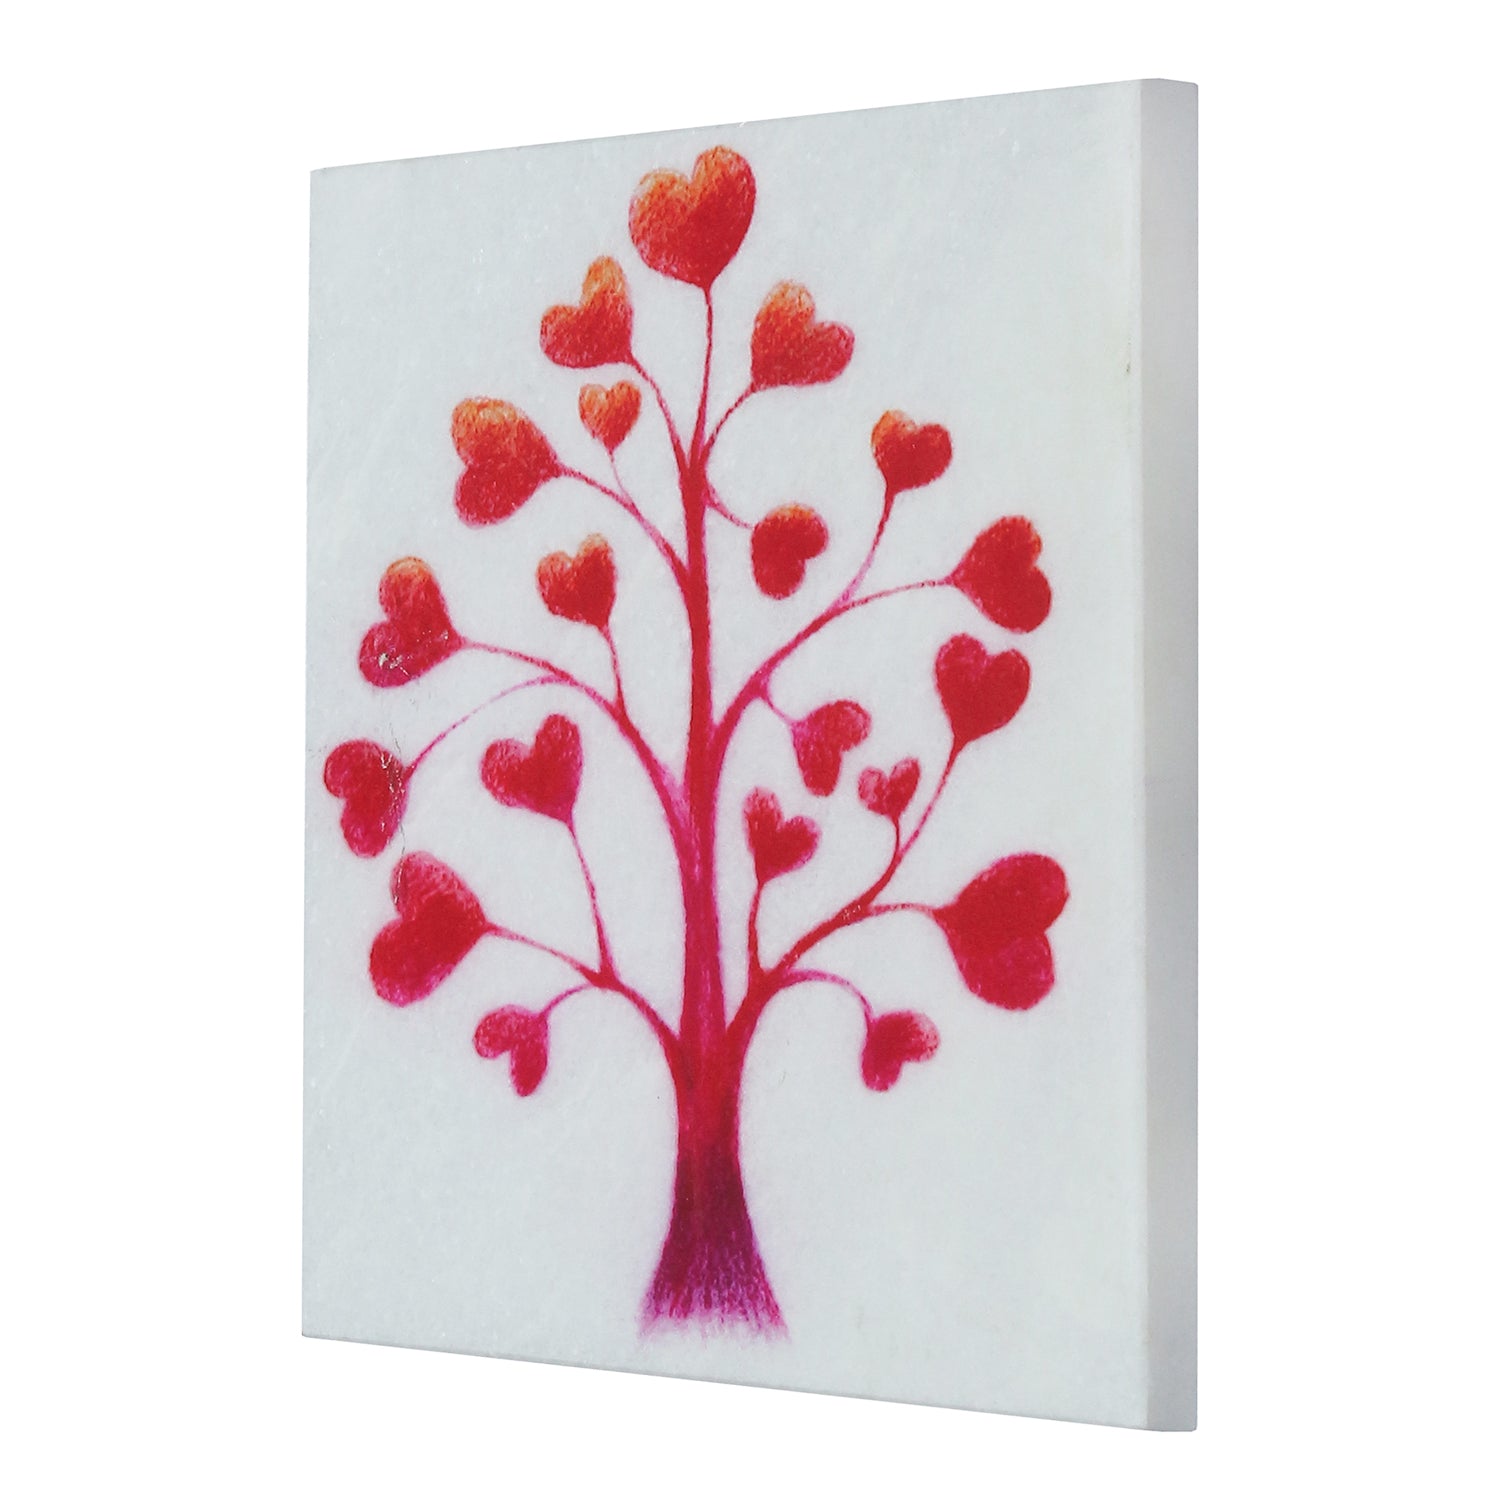 Red Hearts Tree Painting On Marble Square Tile 4